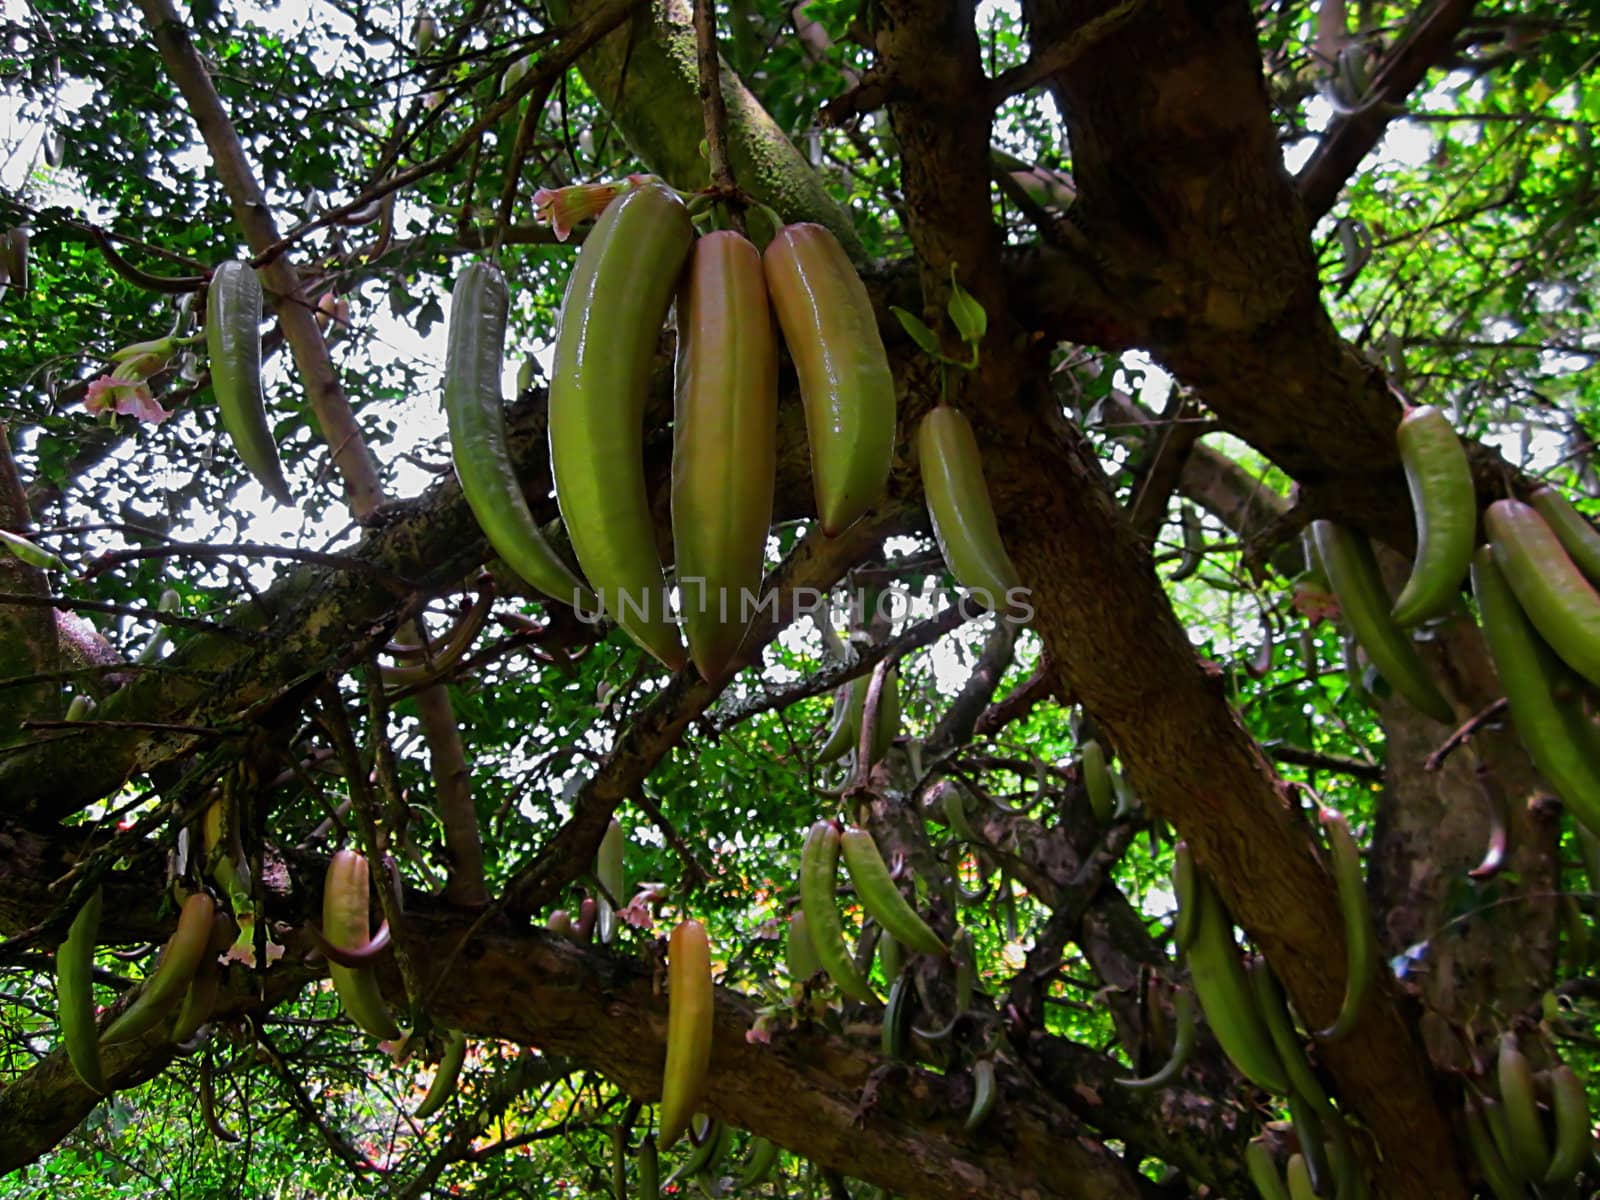 Guajilote (Latin Name: Parmentiera edulis) is a tree native to Mexico and Guatemala.  Its fruits, which have a flavor similar to sugar cane, can be eaten raw, cooked, or used in preserves.